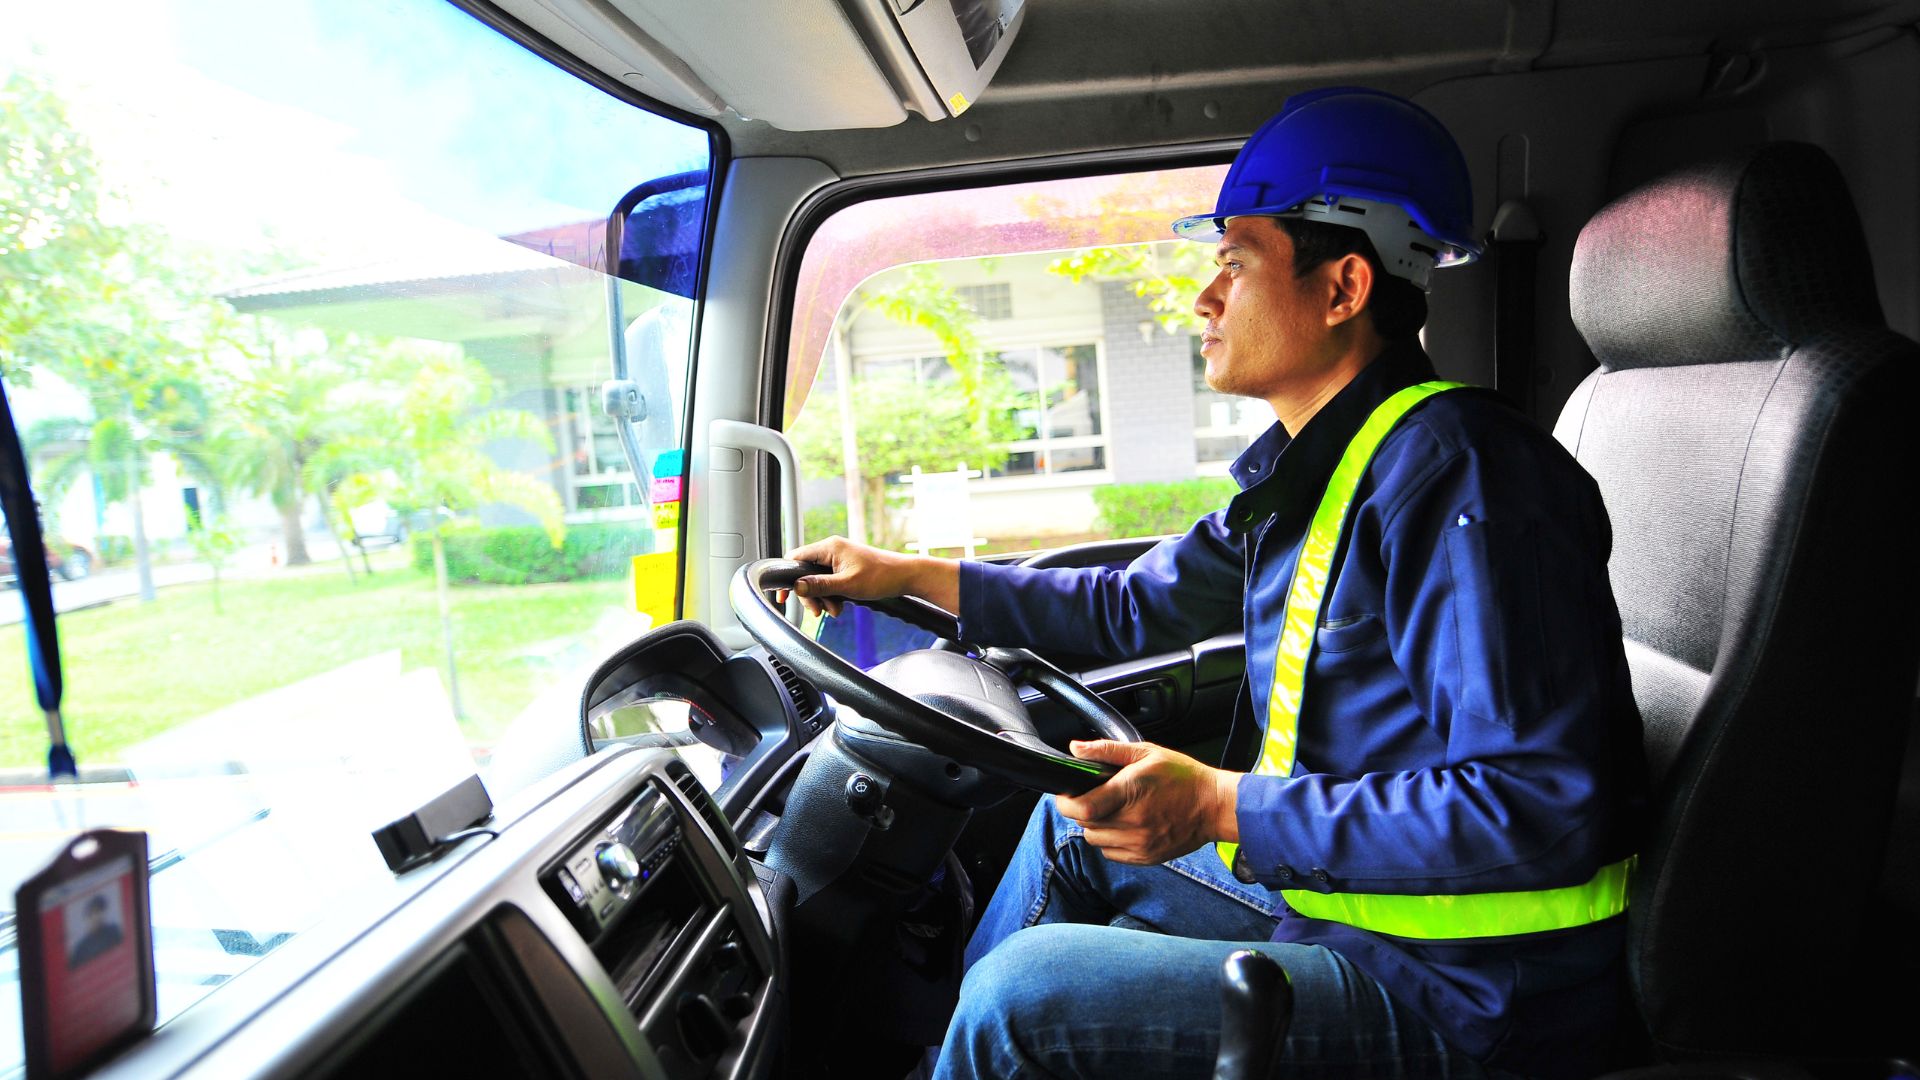 Man driving truck while wearing safety helmet and vest | Fleet Management | Visual Planning